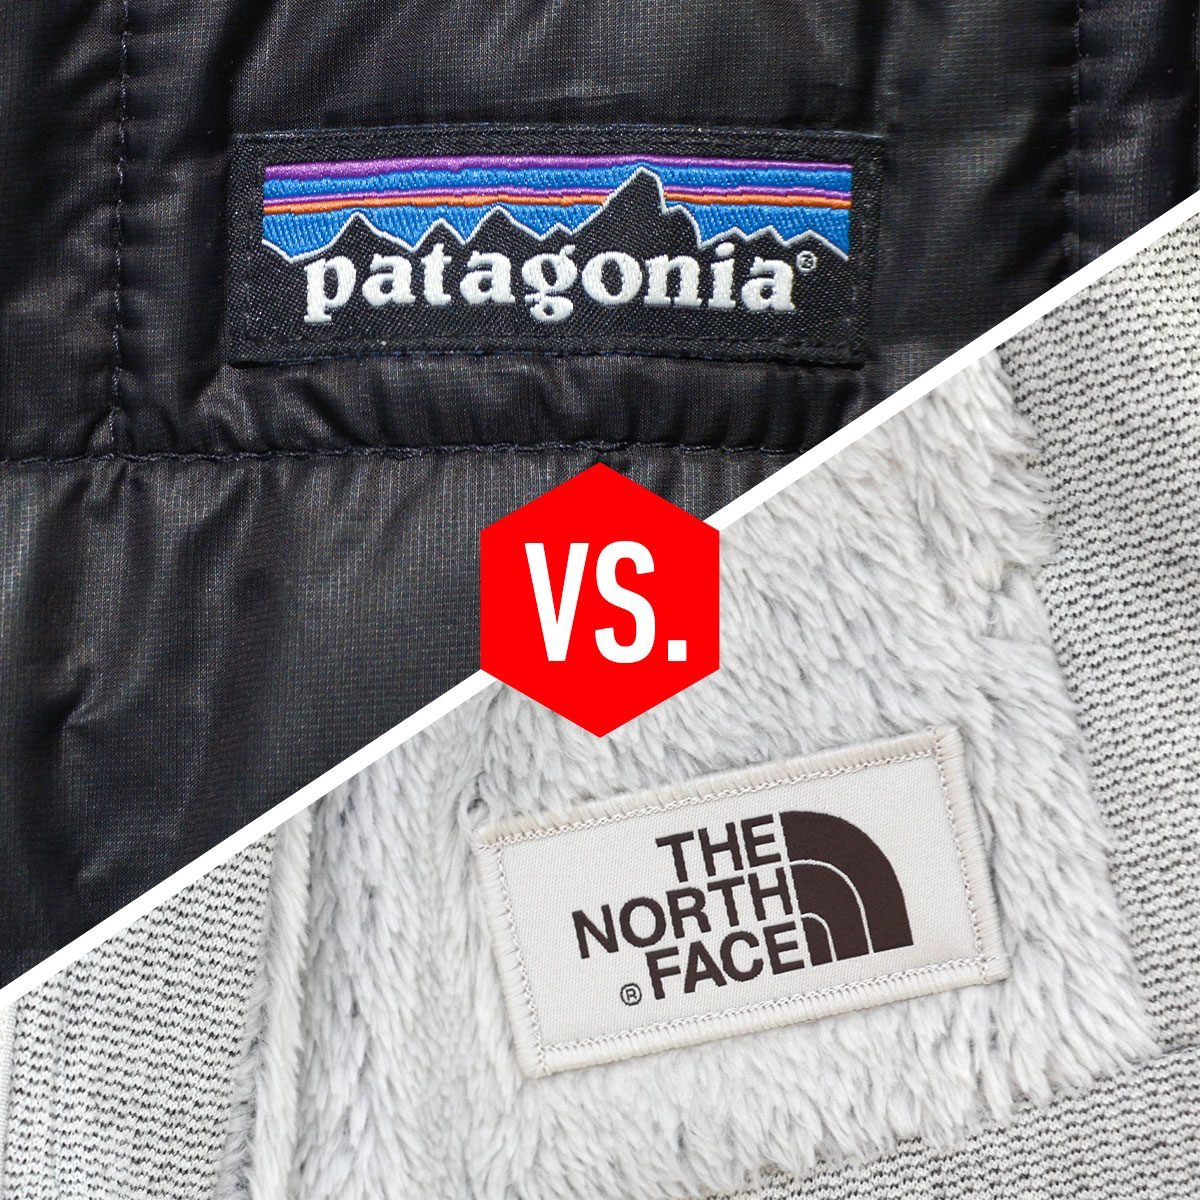 Outdoor clothing brand Patagonia is now owned by an environmental